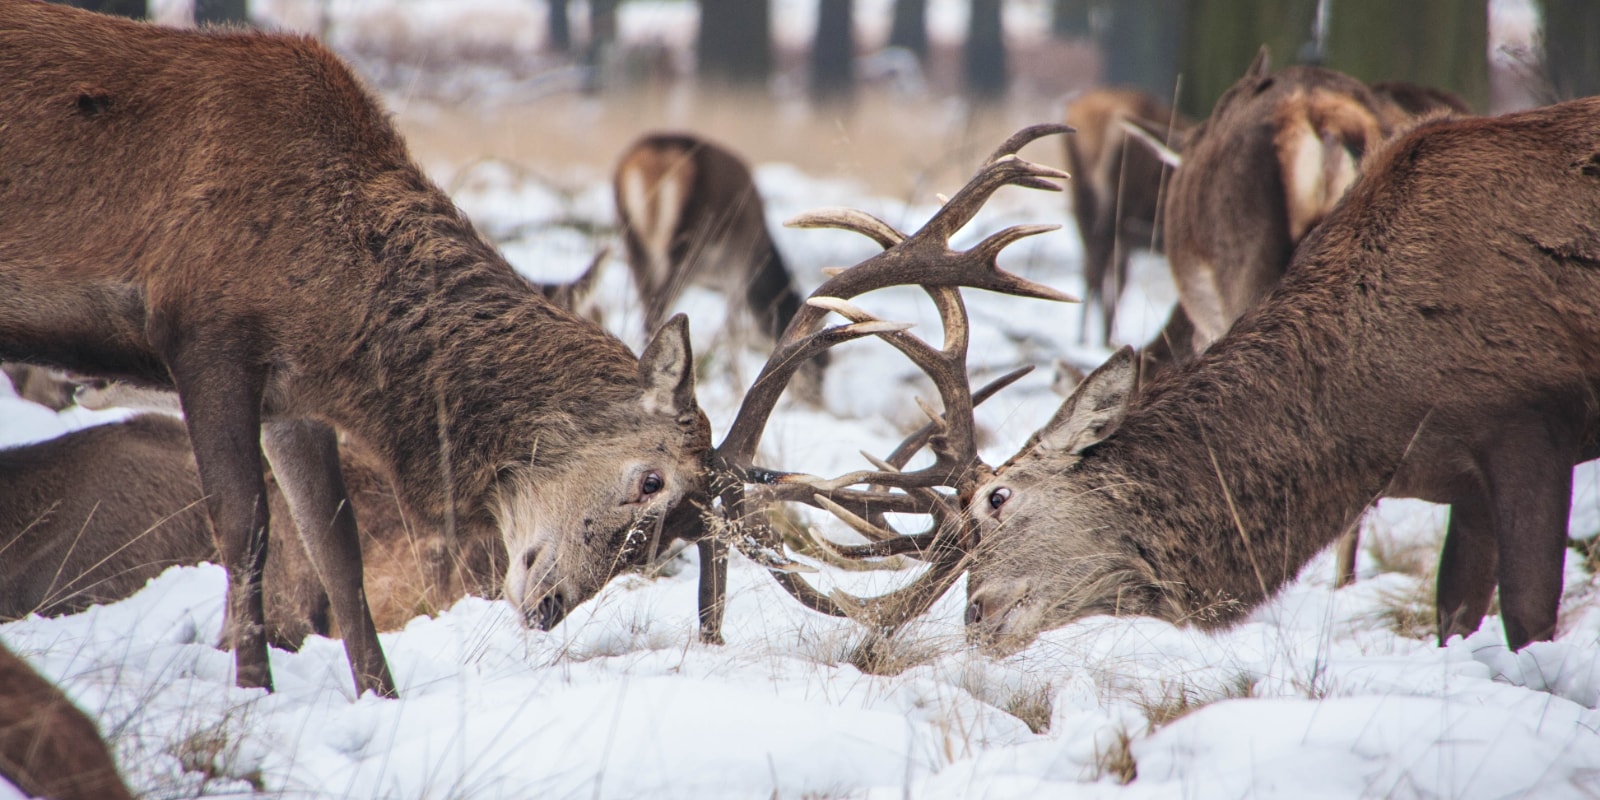 Stags fighting in the snow.